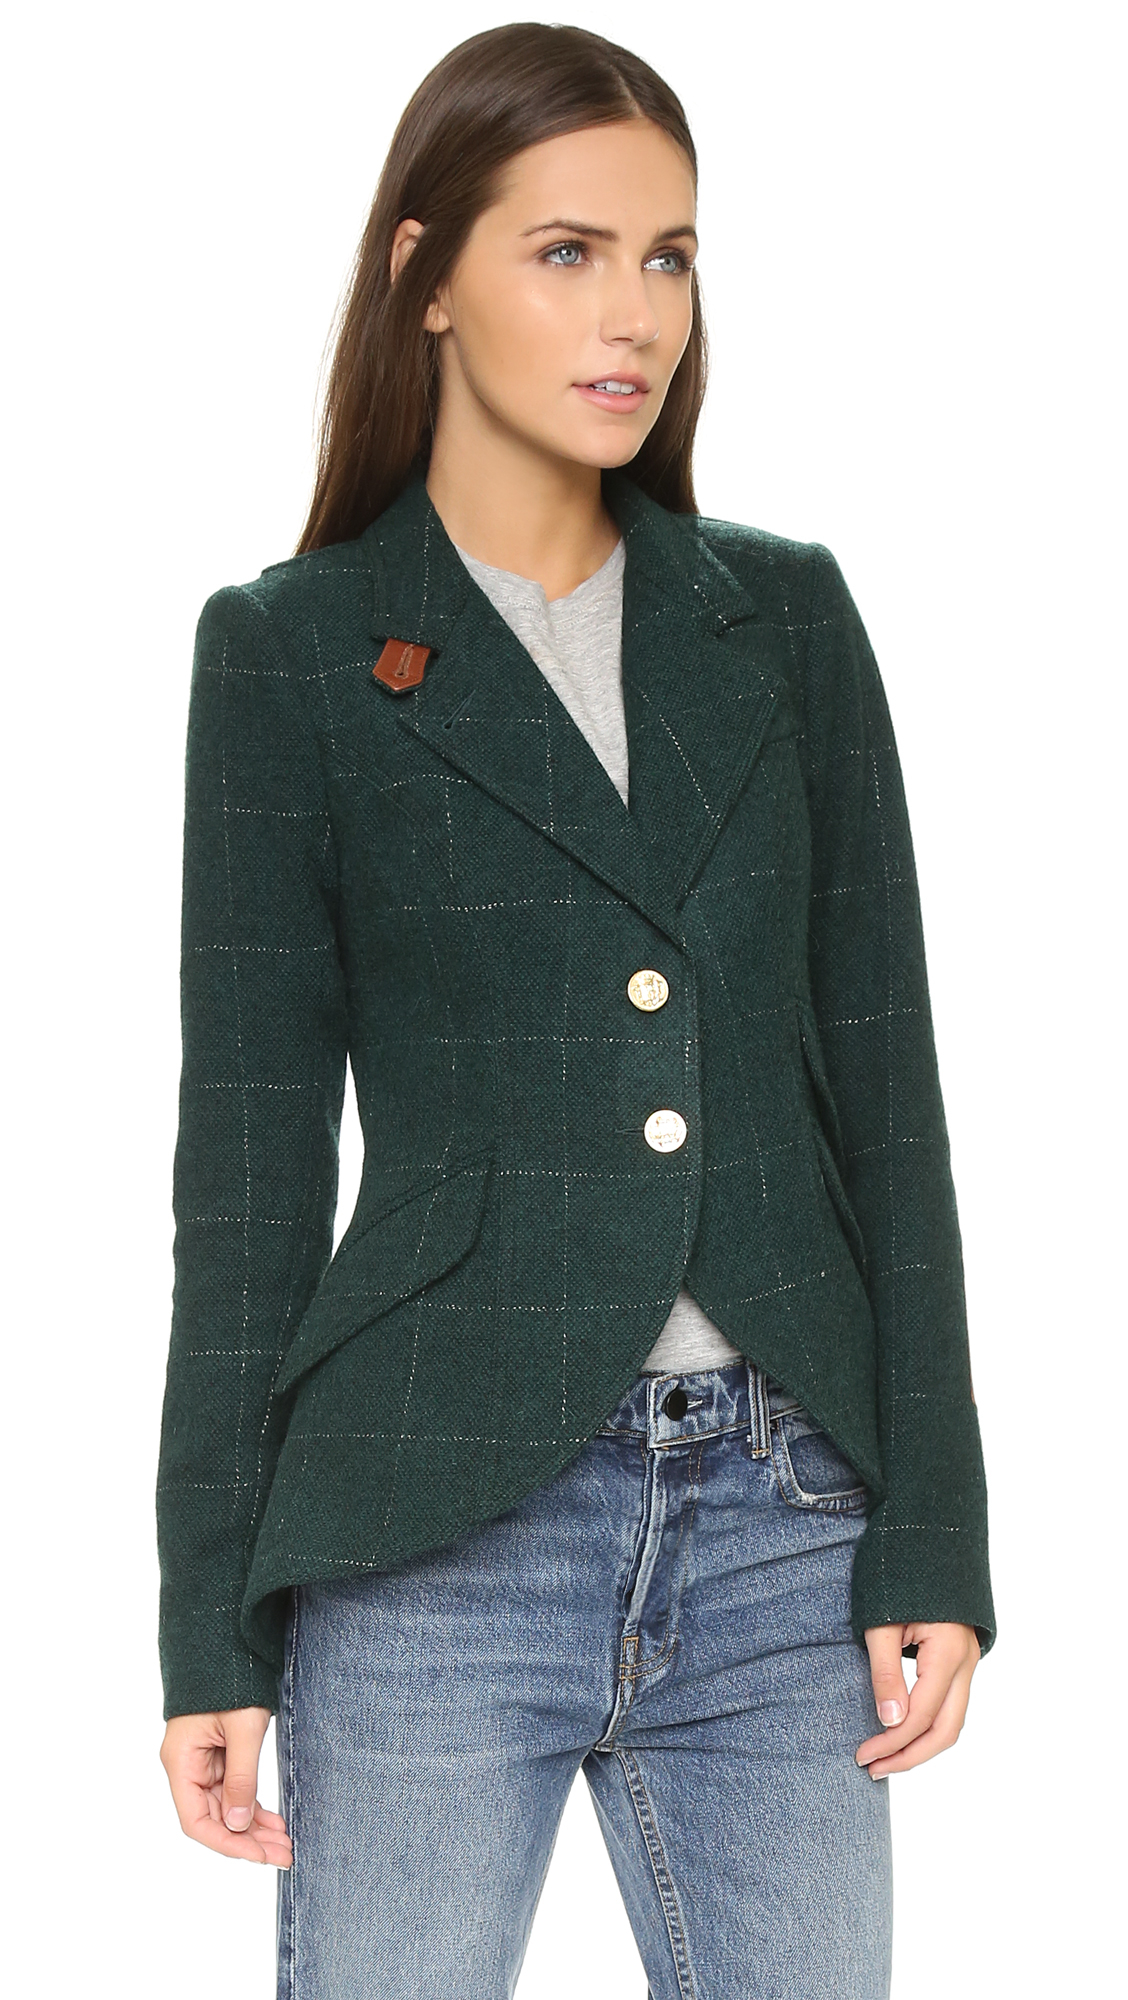 Lyst - Smythe Hunting Jacket - Jade W/camel Leather in Green